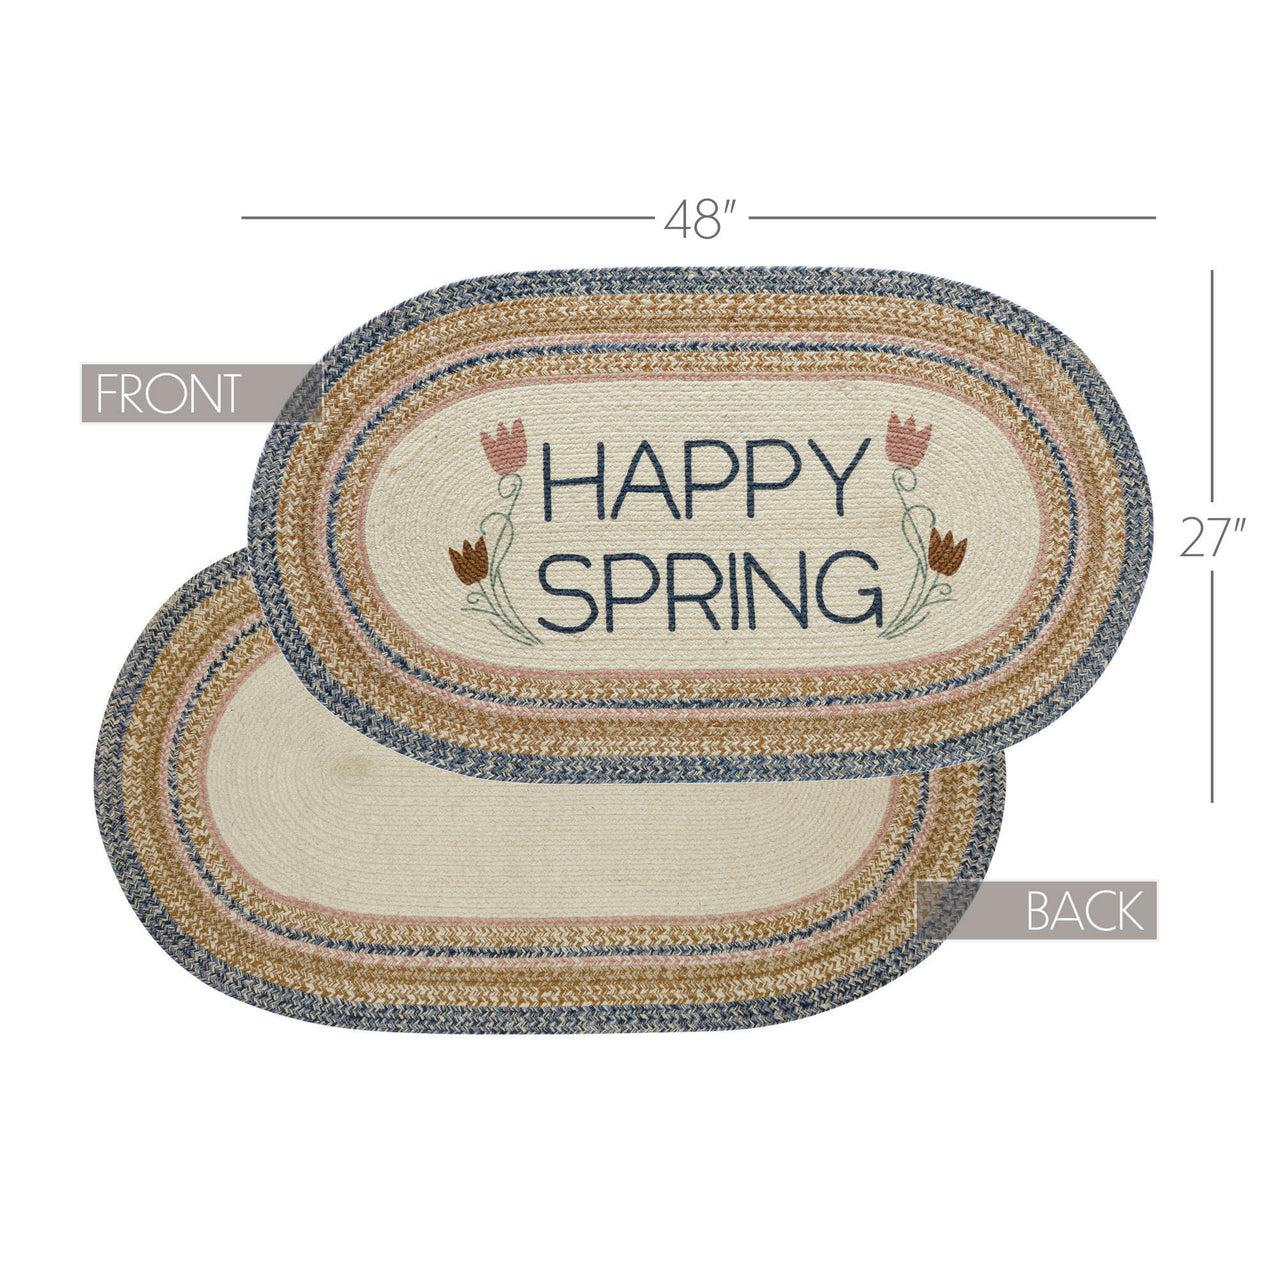 Kaila Happy Spring Jute Braided Rug Oval with Rug Pad 27"x48" VHC Brands